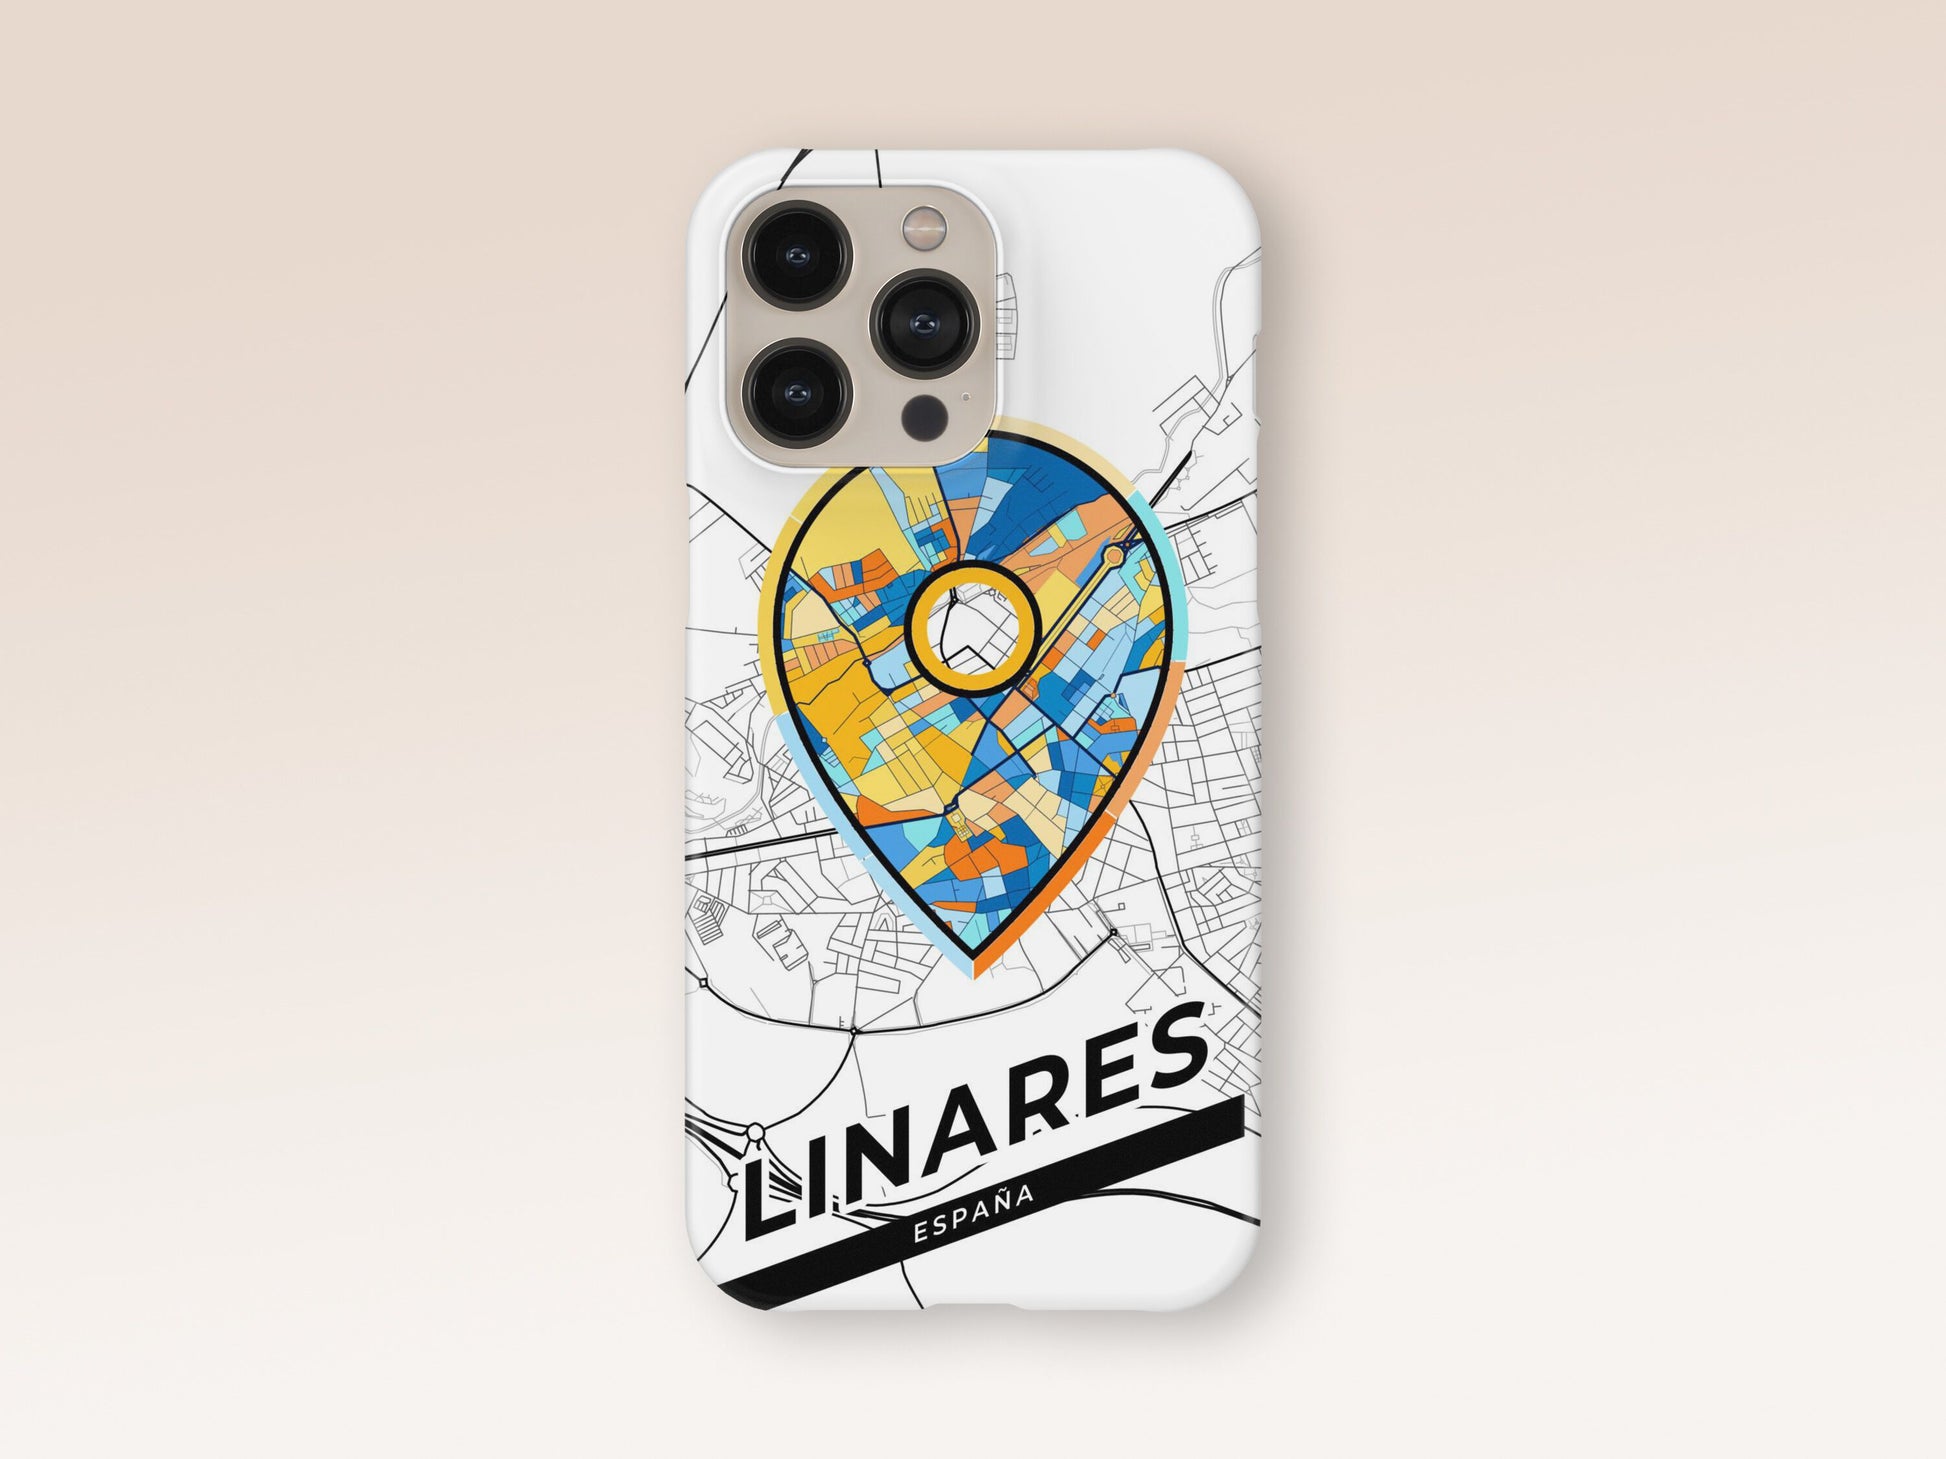 Linares Spain slim phone case with colorful icon. Birthday, wedding or housewarming gift. Couple match cases. 1